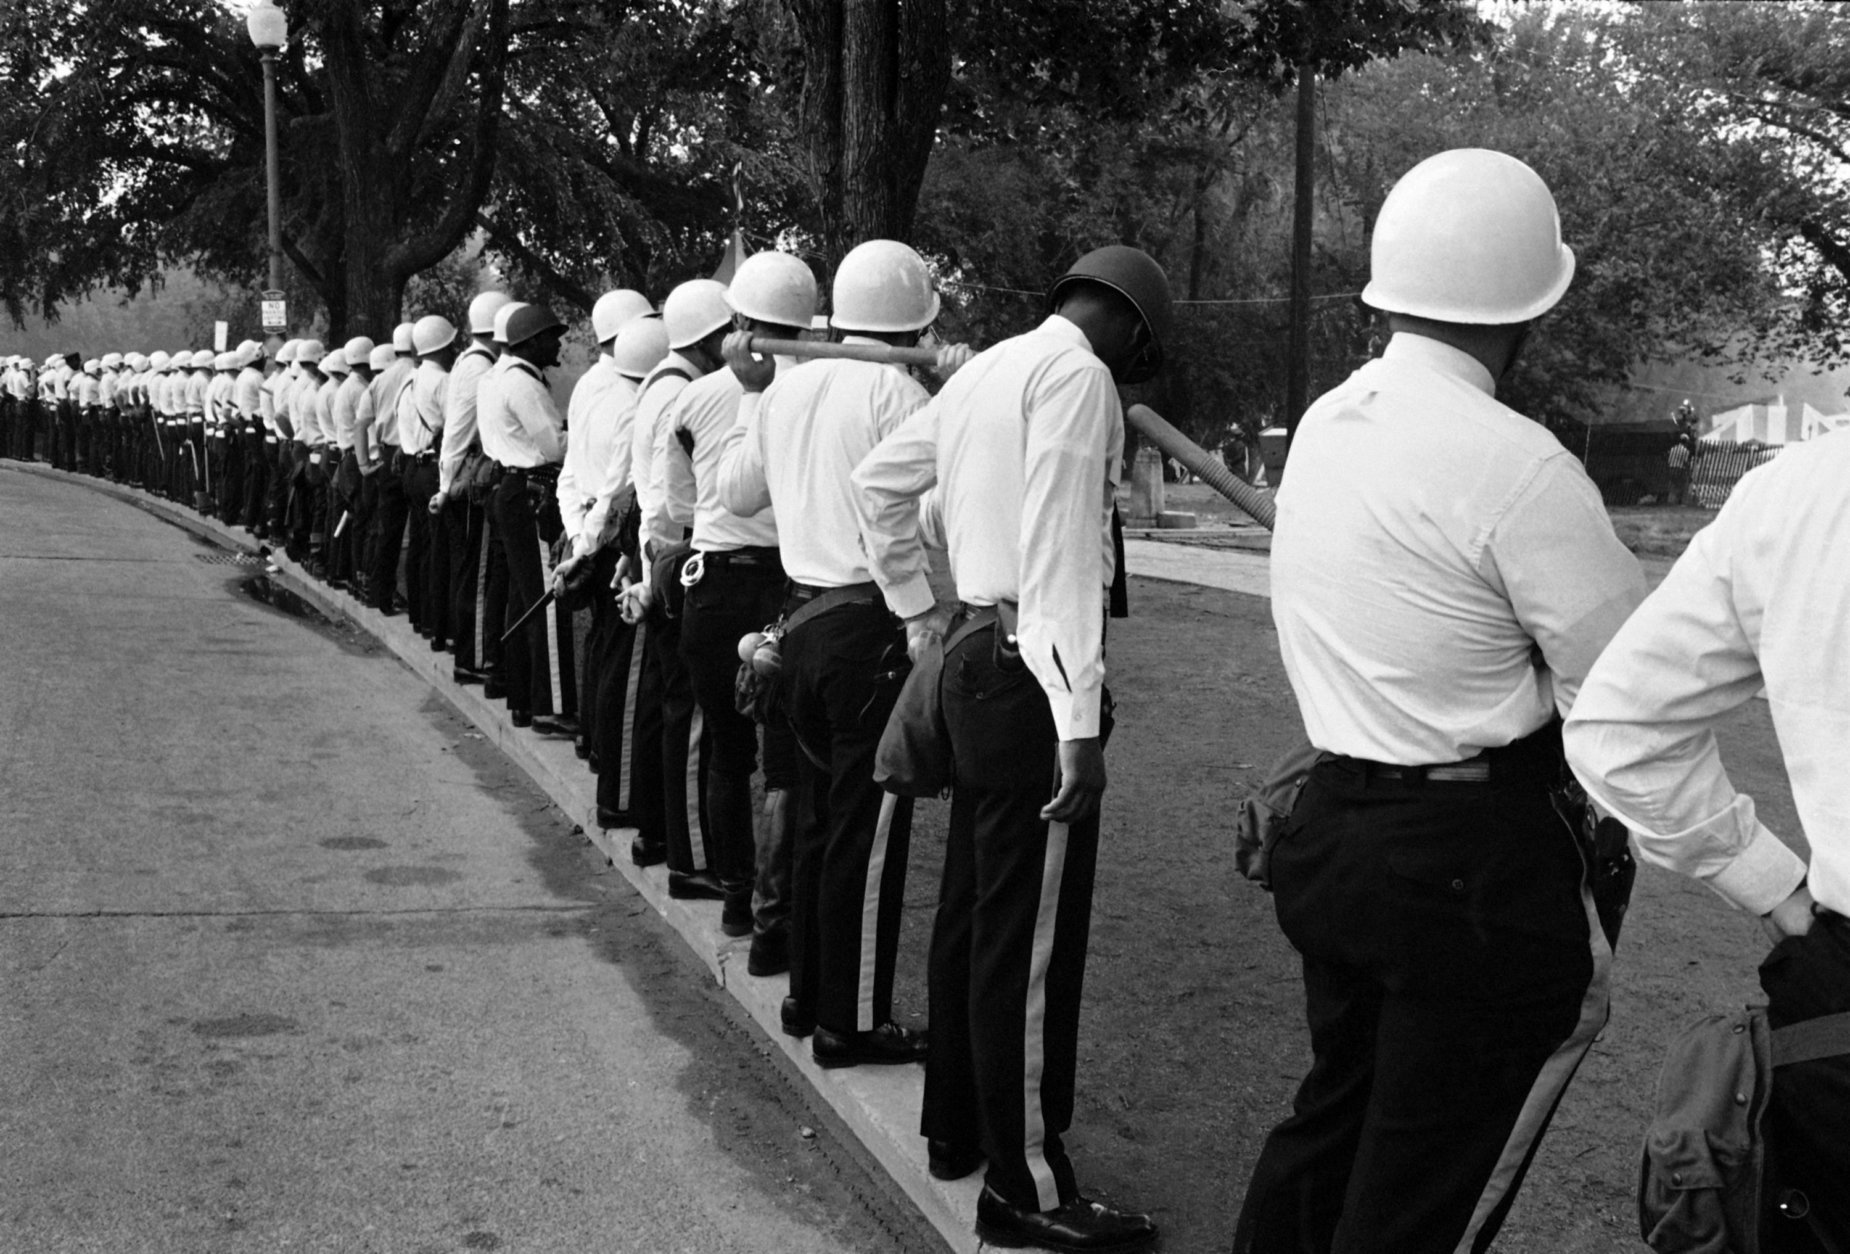 A line of helmeted police stand shoulder to shoulder just outside an entrance to Resurrection City, the encampment of the Poor People's Campaign in Washington, June 24, 1968. The permit allowing the encampment ended last night and police were on hand to clear out any residents who remain. (AP Photo/Bob Daugherty)